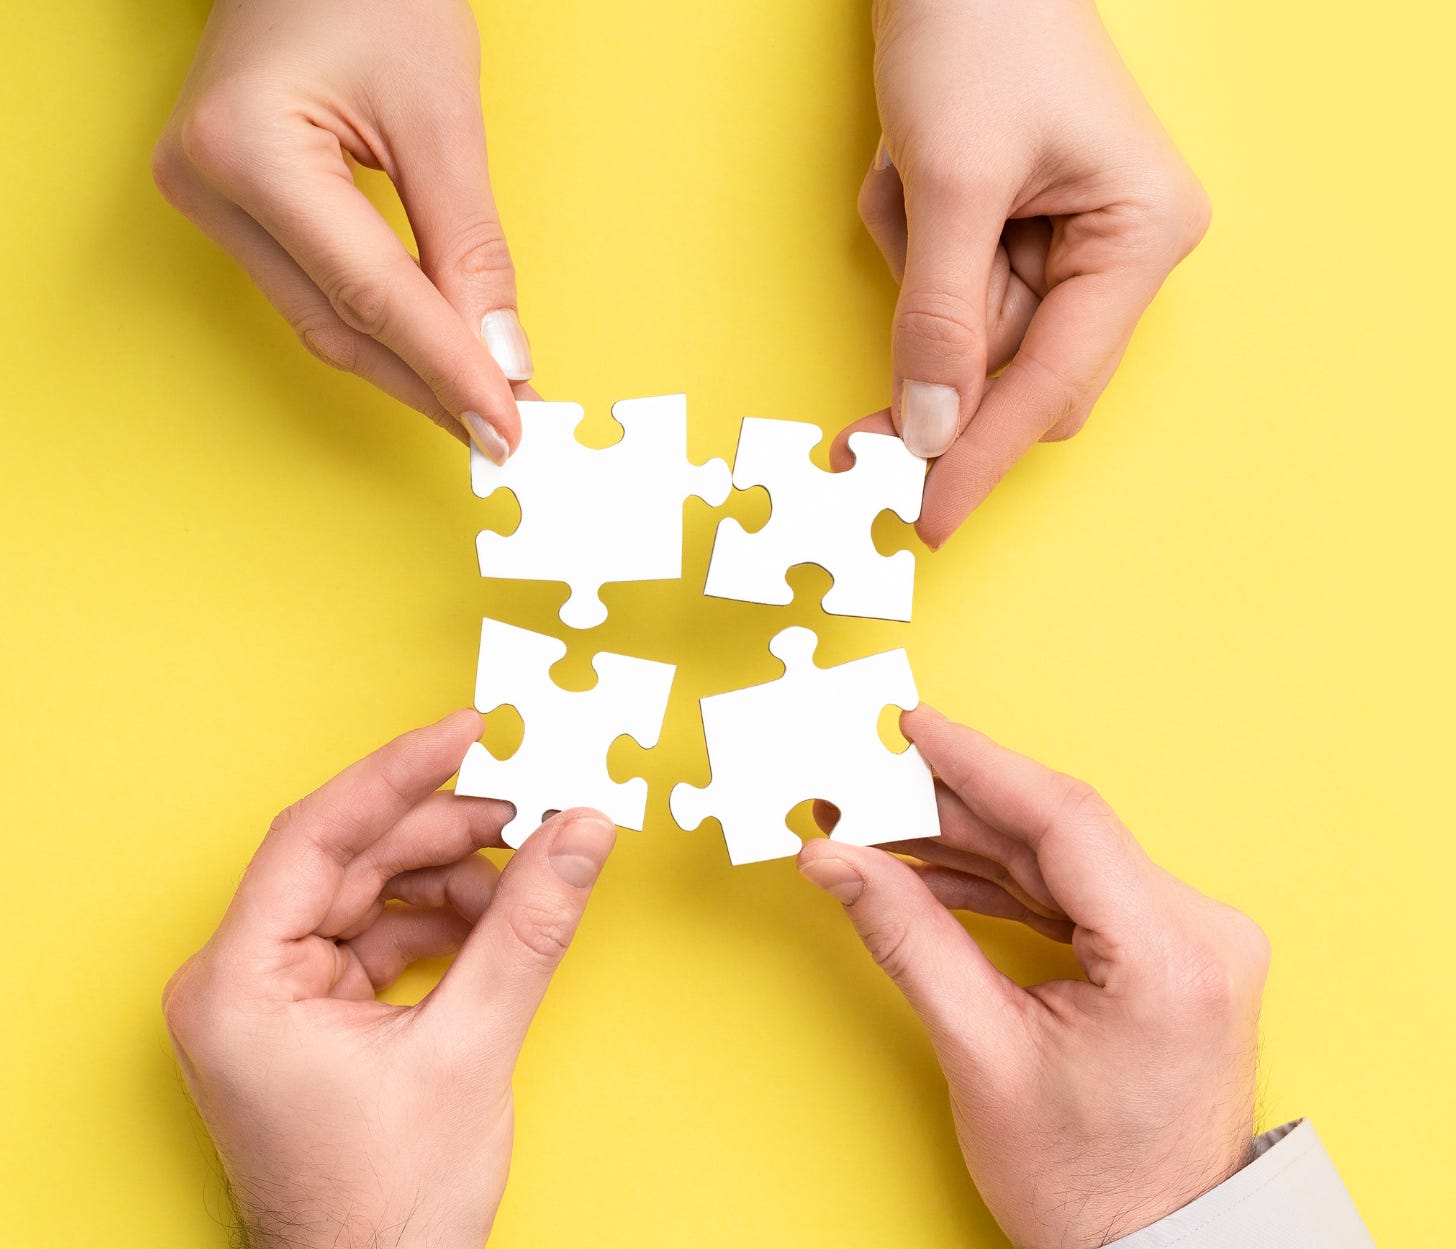 Two pairs of hands each hold two blank white jigsaw puzzle pieces against a yellow background.